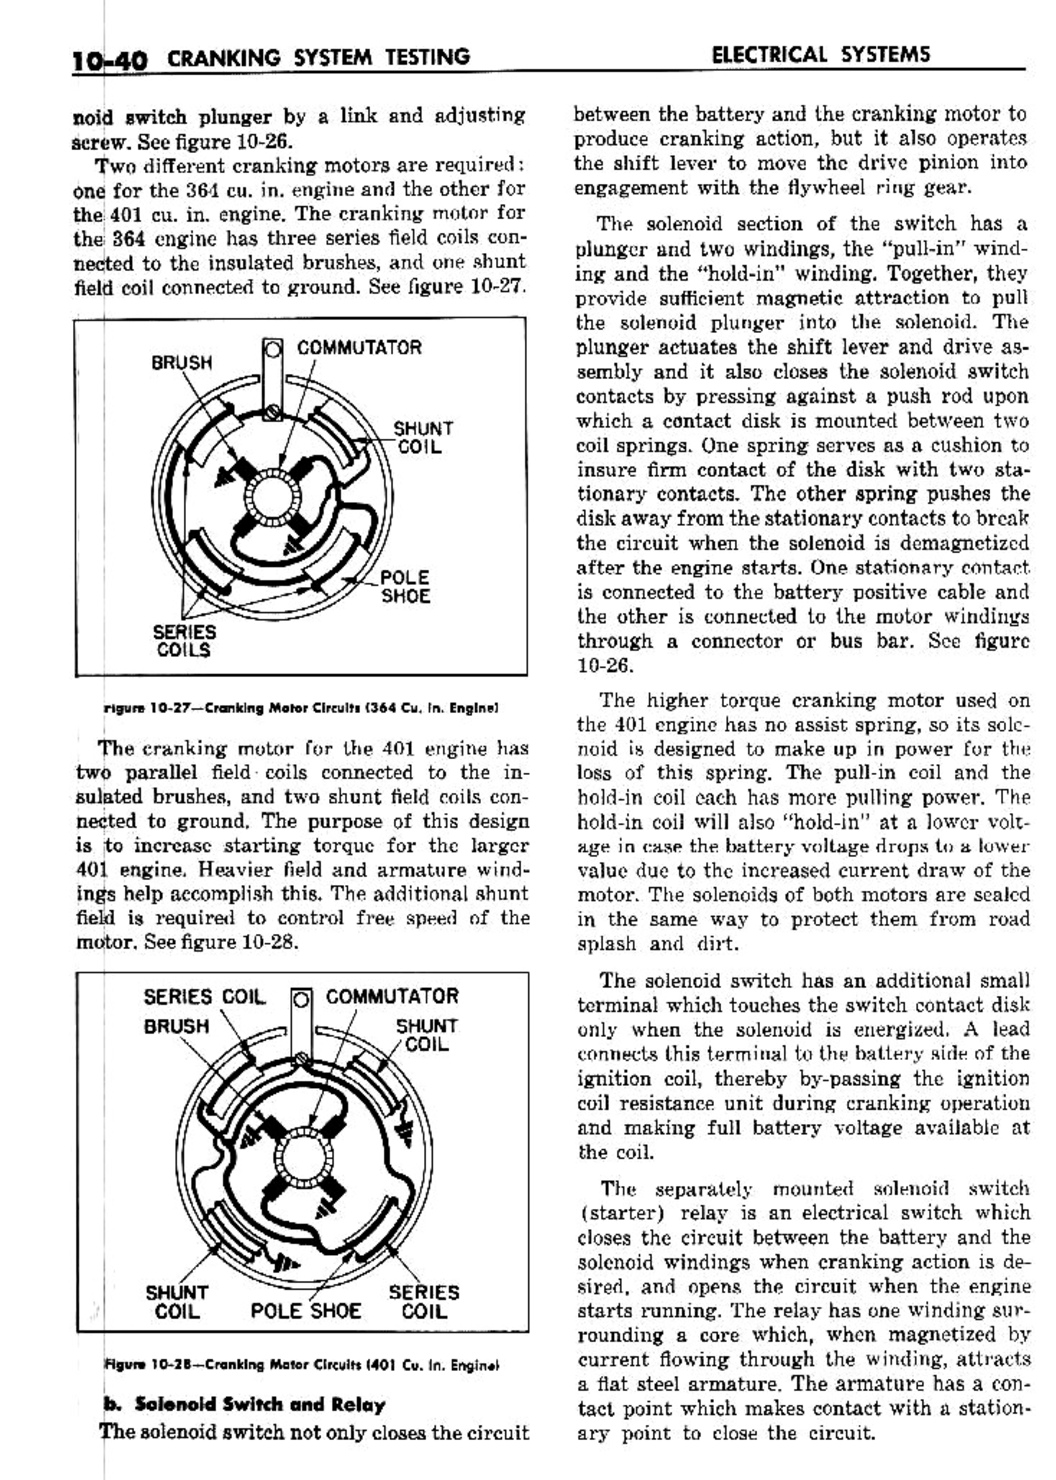 n_11 1959 Buick Shop Manual - Electrical Systems-040-040.jpg